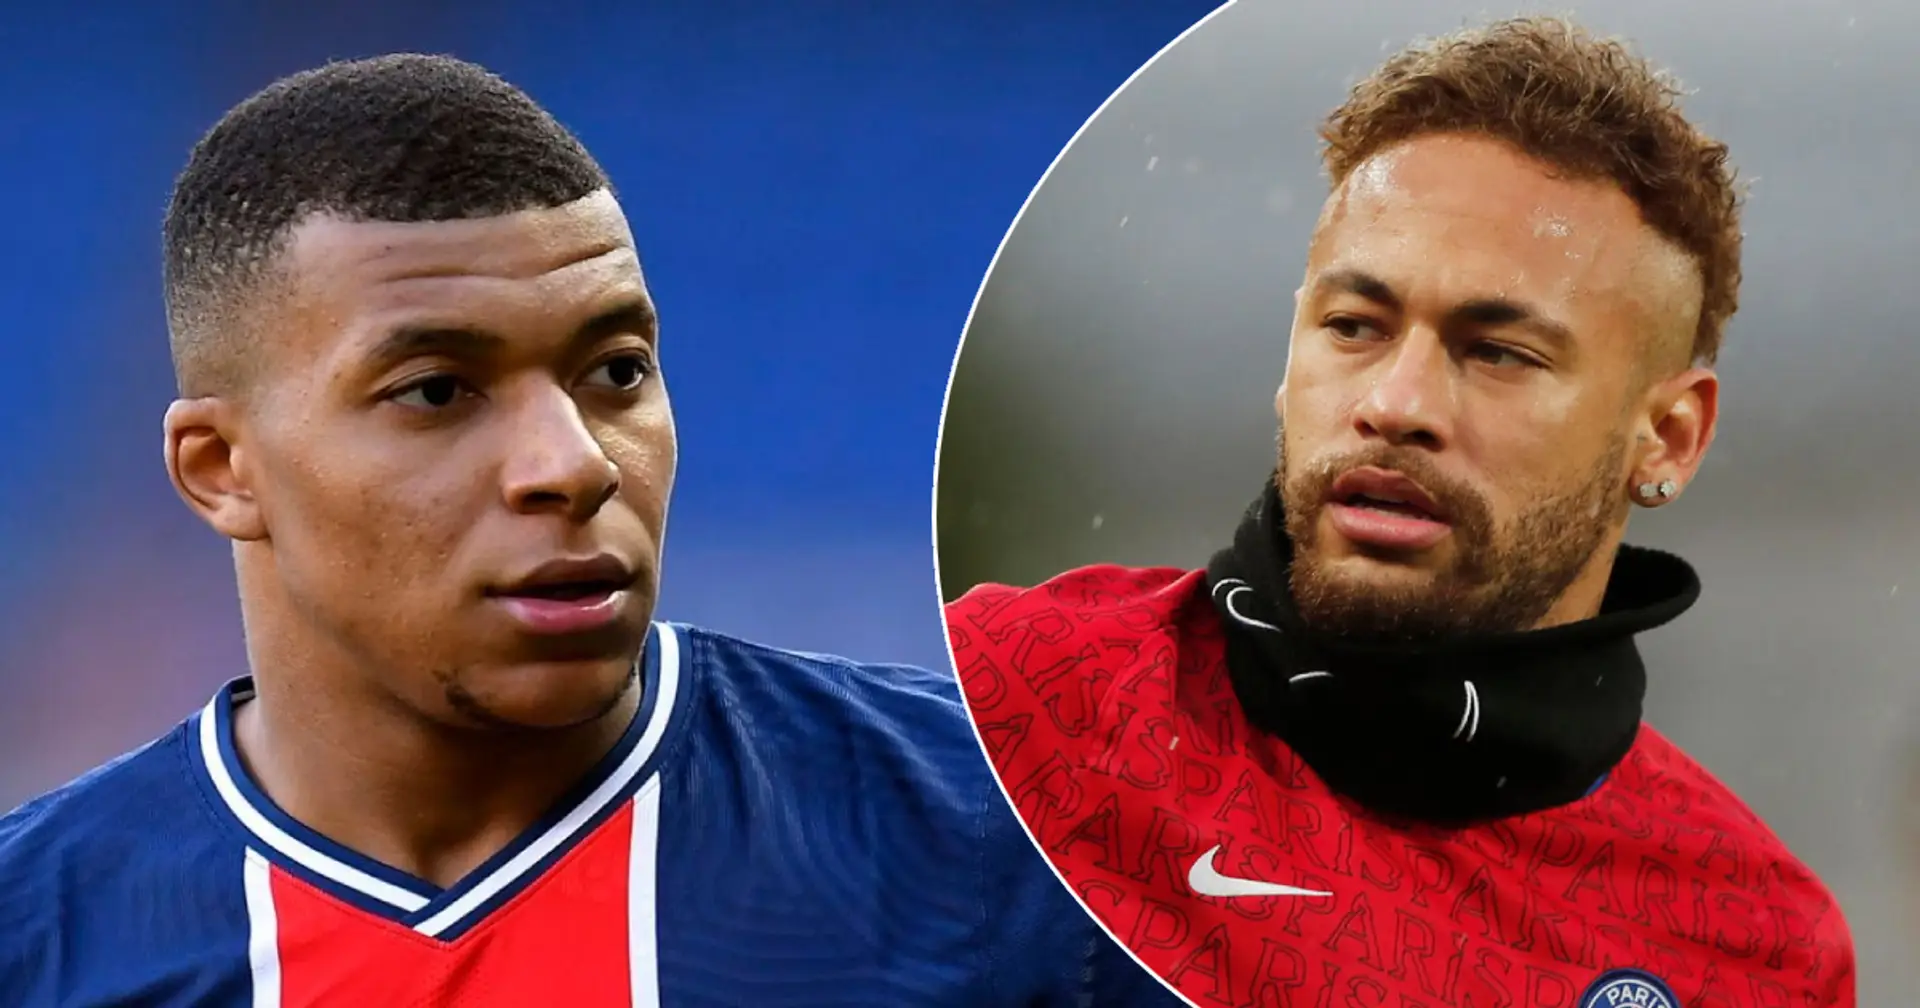 PSG set to offer Mbappe Neymar salary to keep him from joining Real Madrid (reliability: 5 stars)